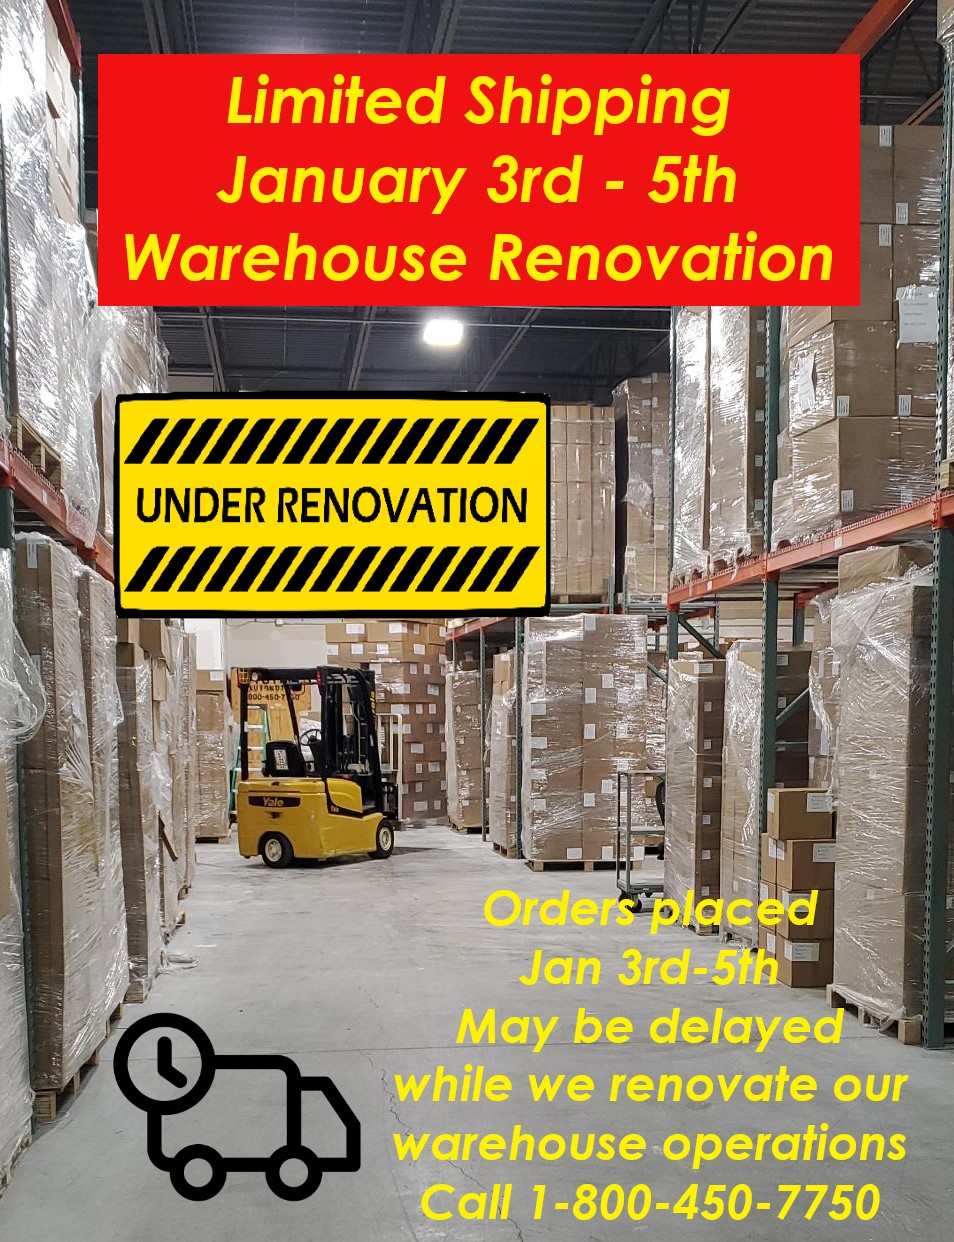 Limited Shipping Hours January 3rd - 5th Warehouse Renovations